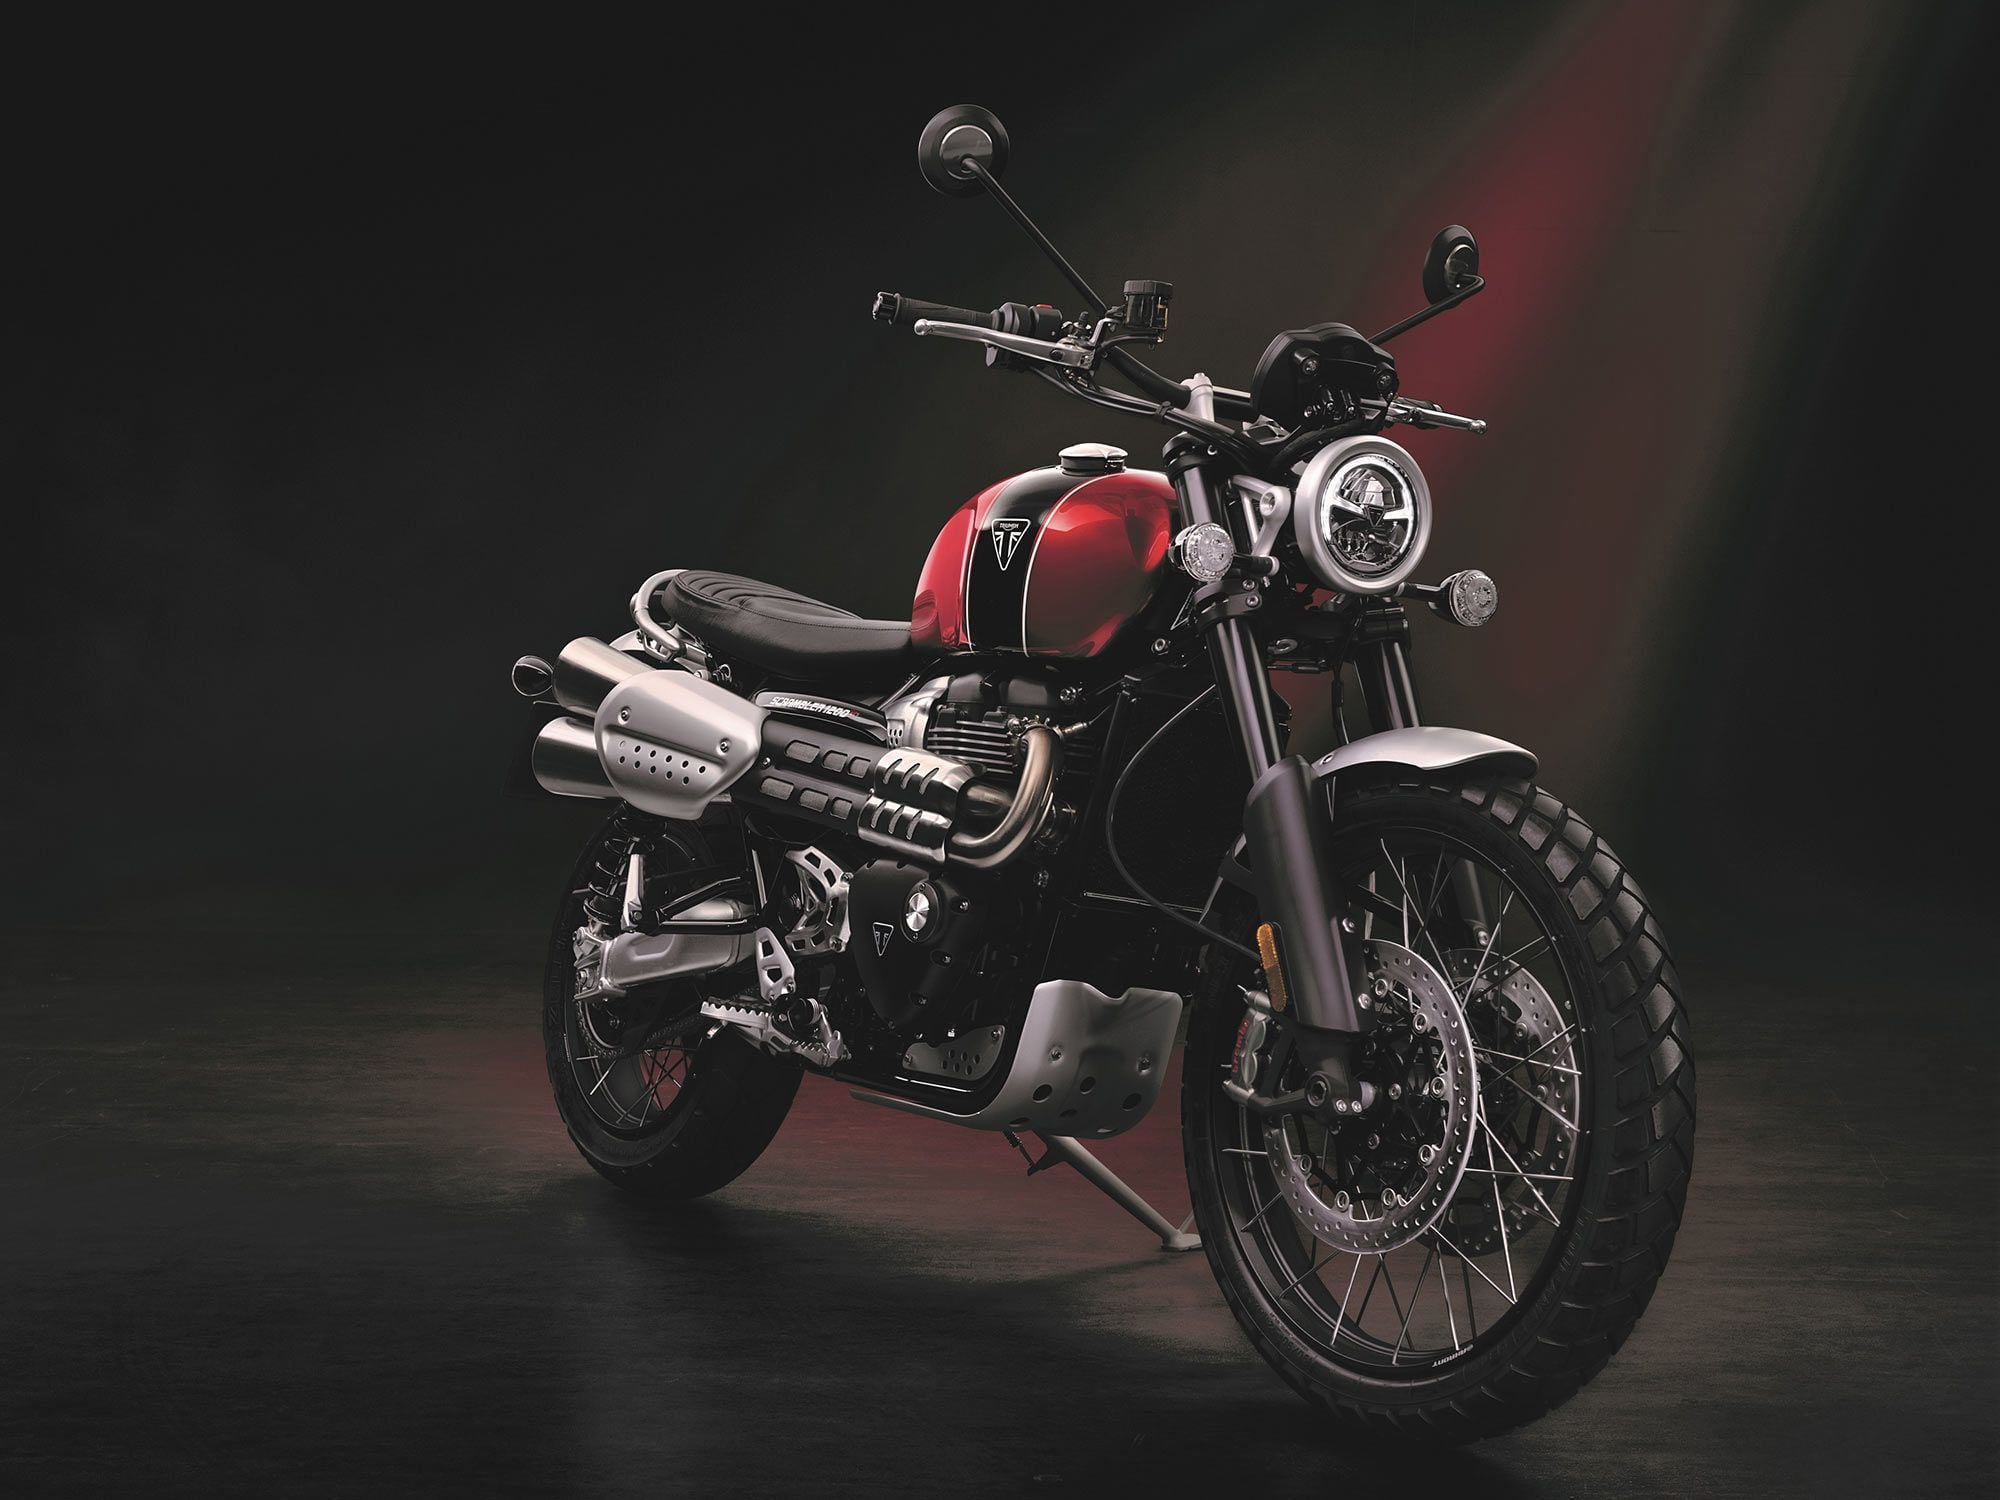 The Scrambler 900 will join the Scrambler 1200 models to make a subfamily in the Modern Classics lineup for 2023.